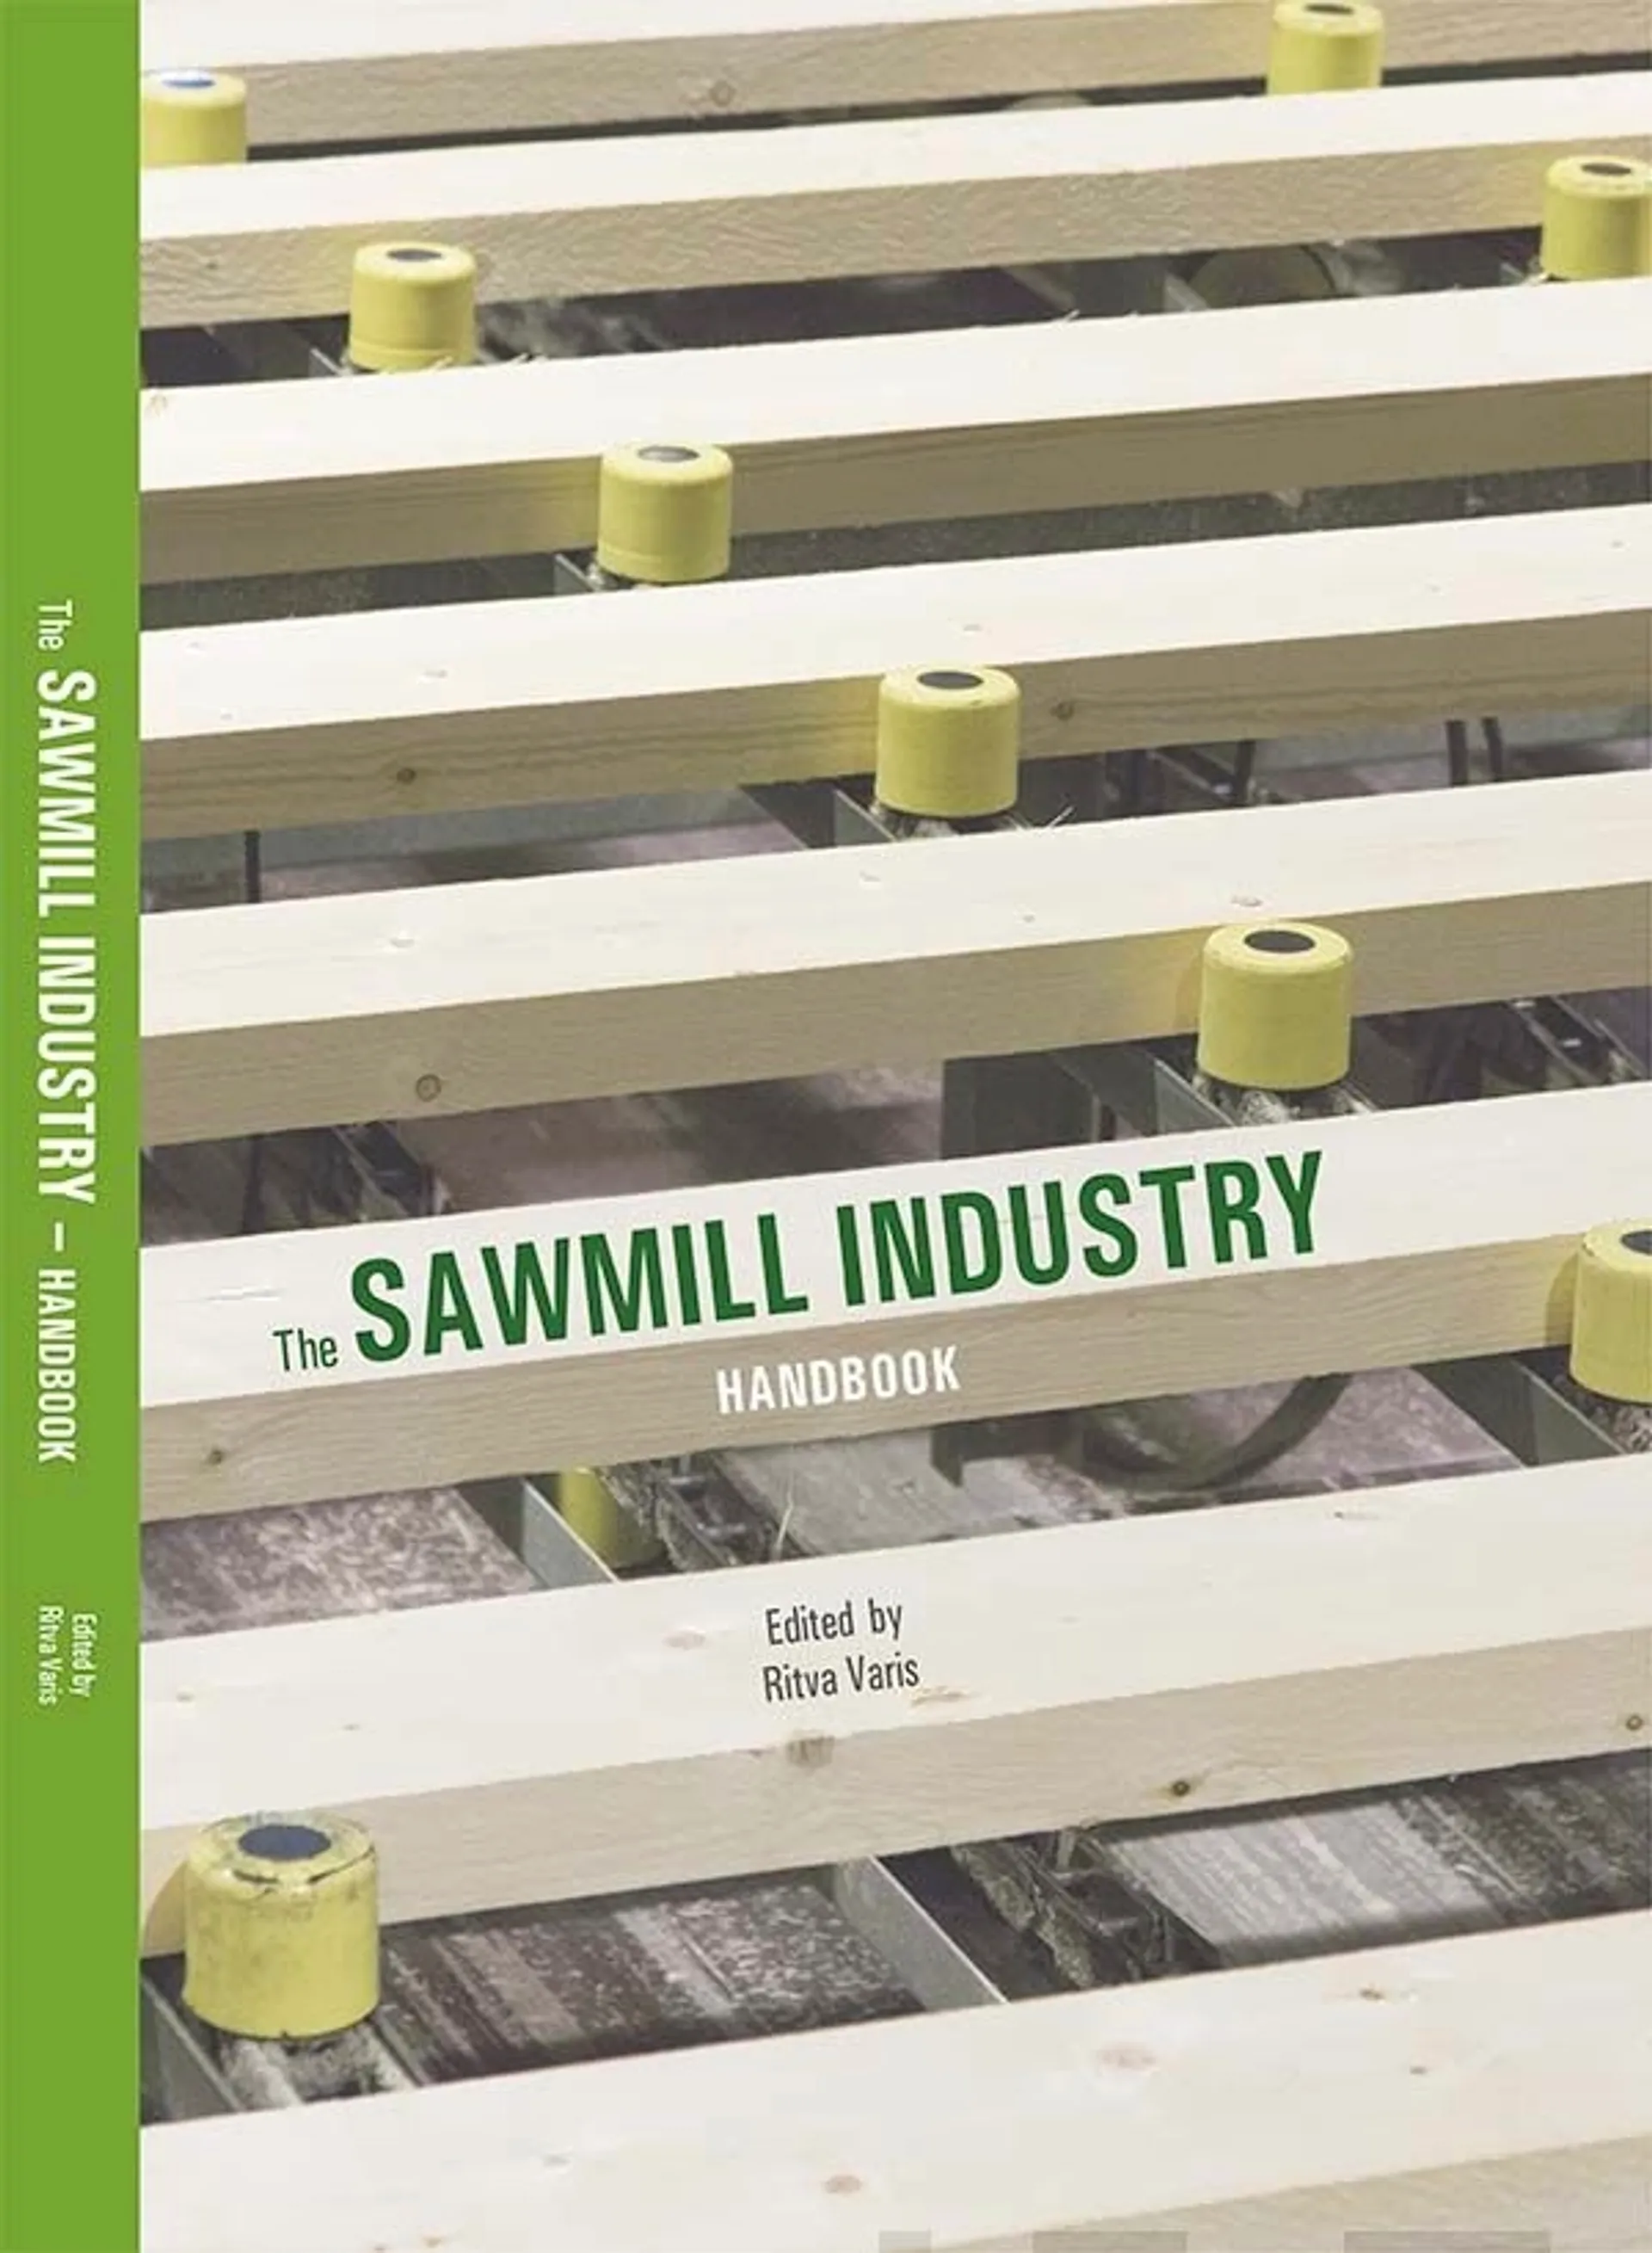 The Sawmill Industry